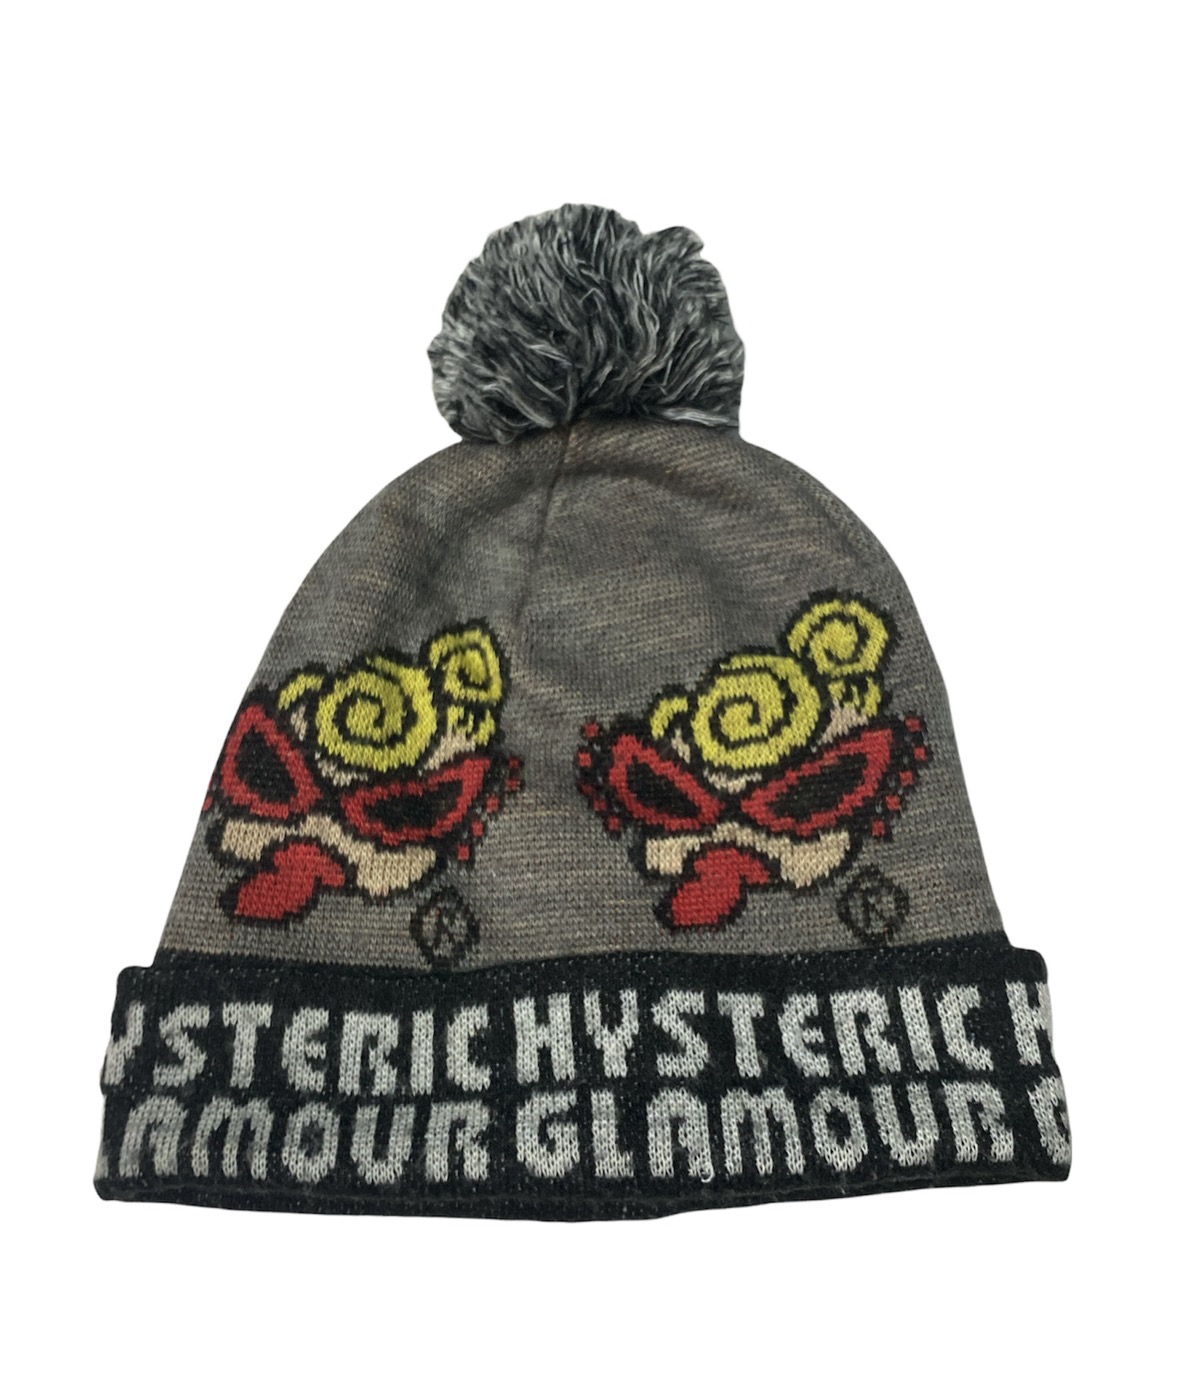 🔥HYSTERIC GLAMOUR BEANIE / SNOW HATS - 2